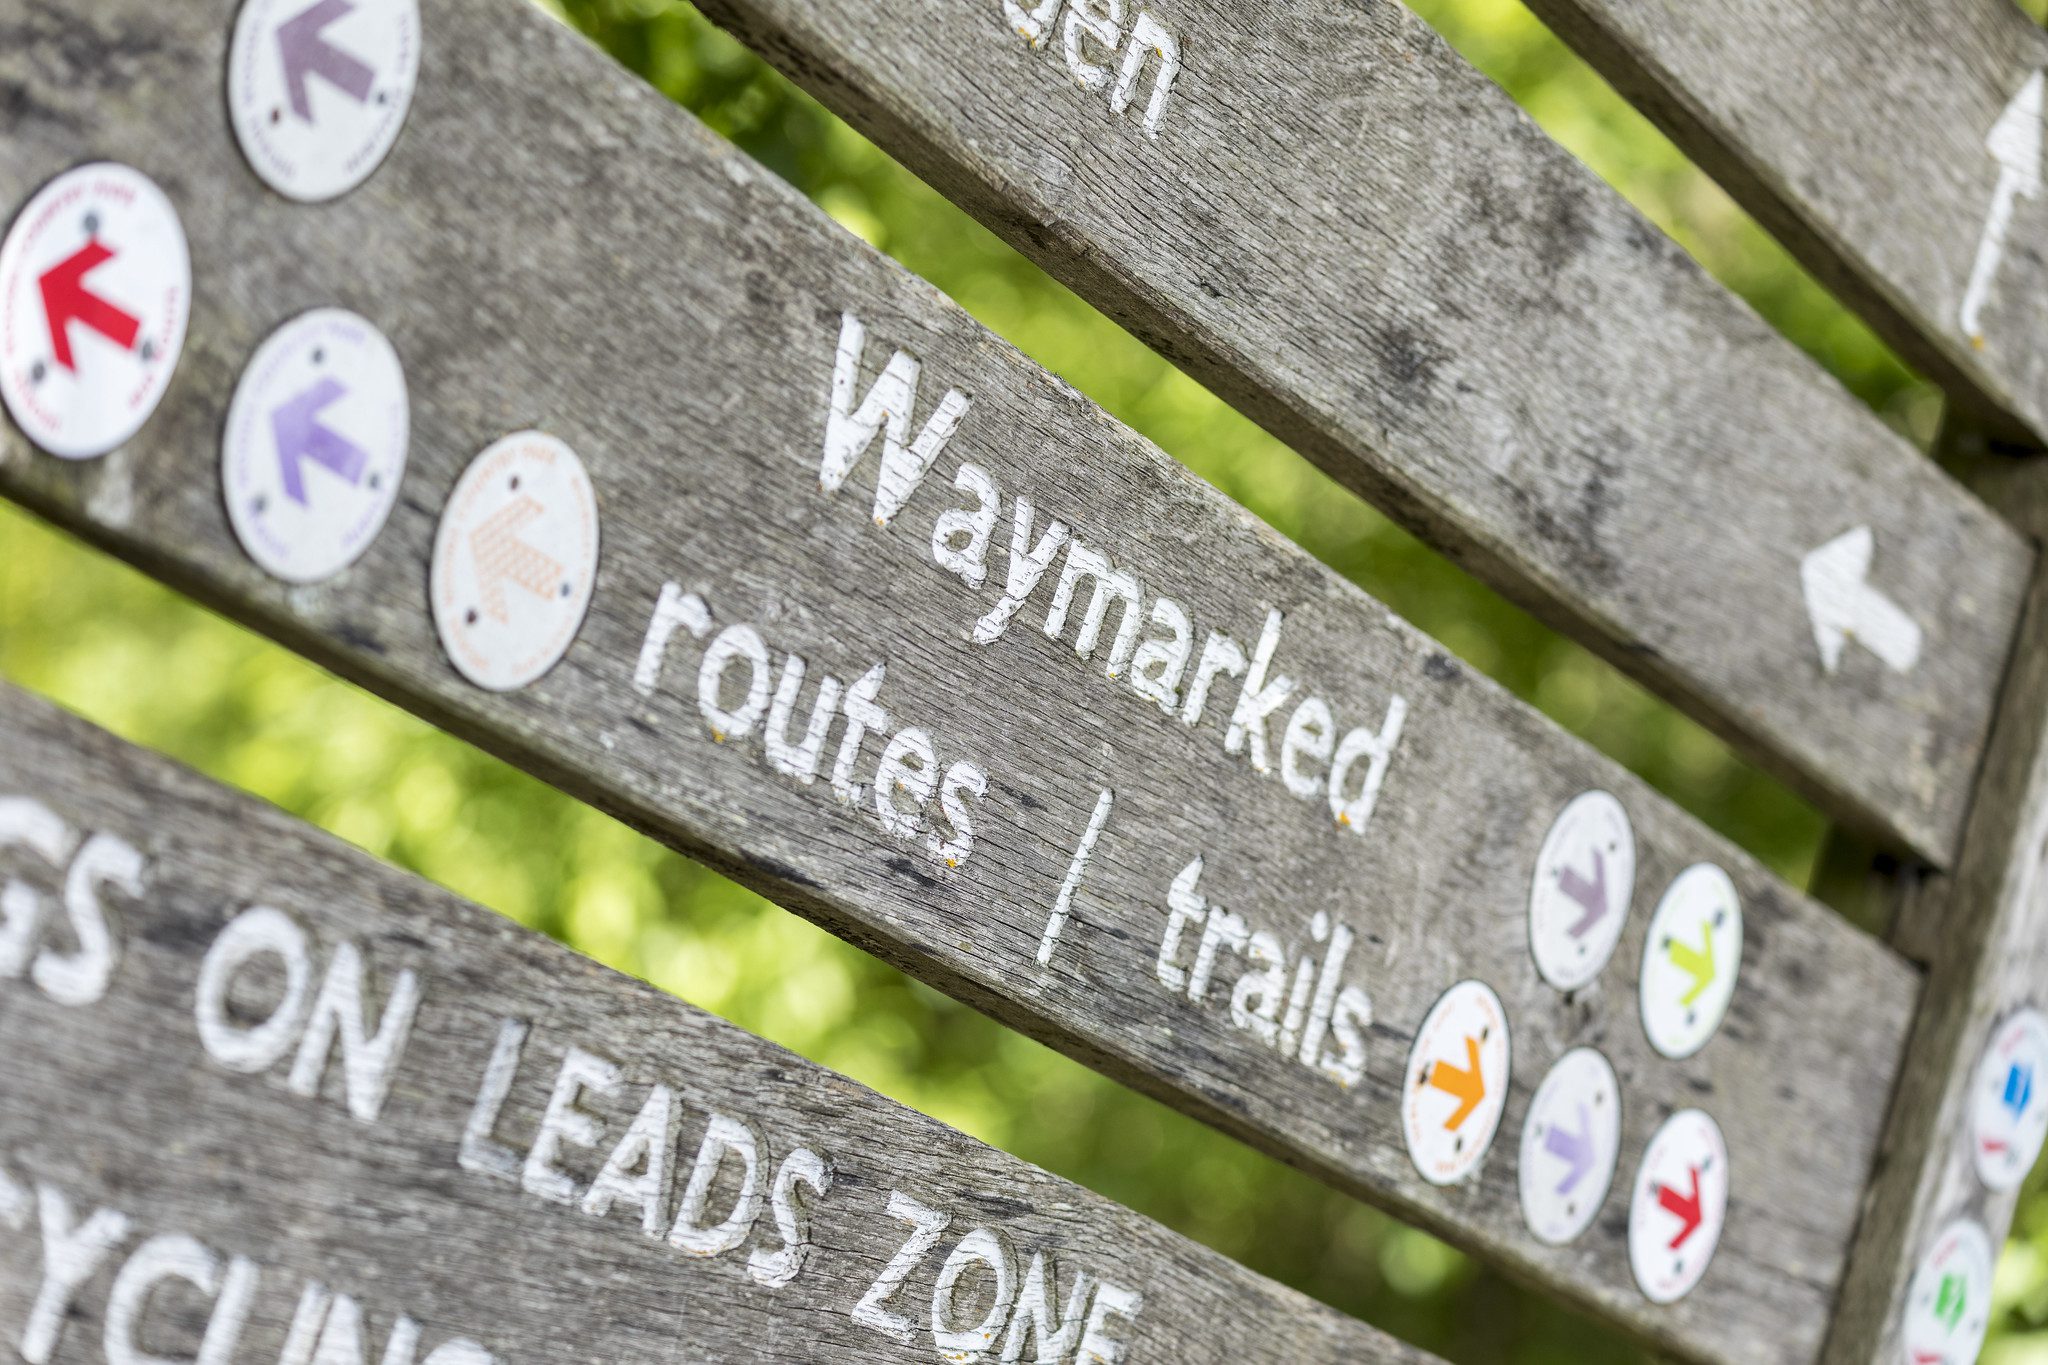 Sign posts at Shorne Woods Country Park